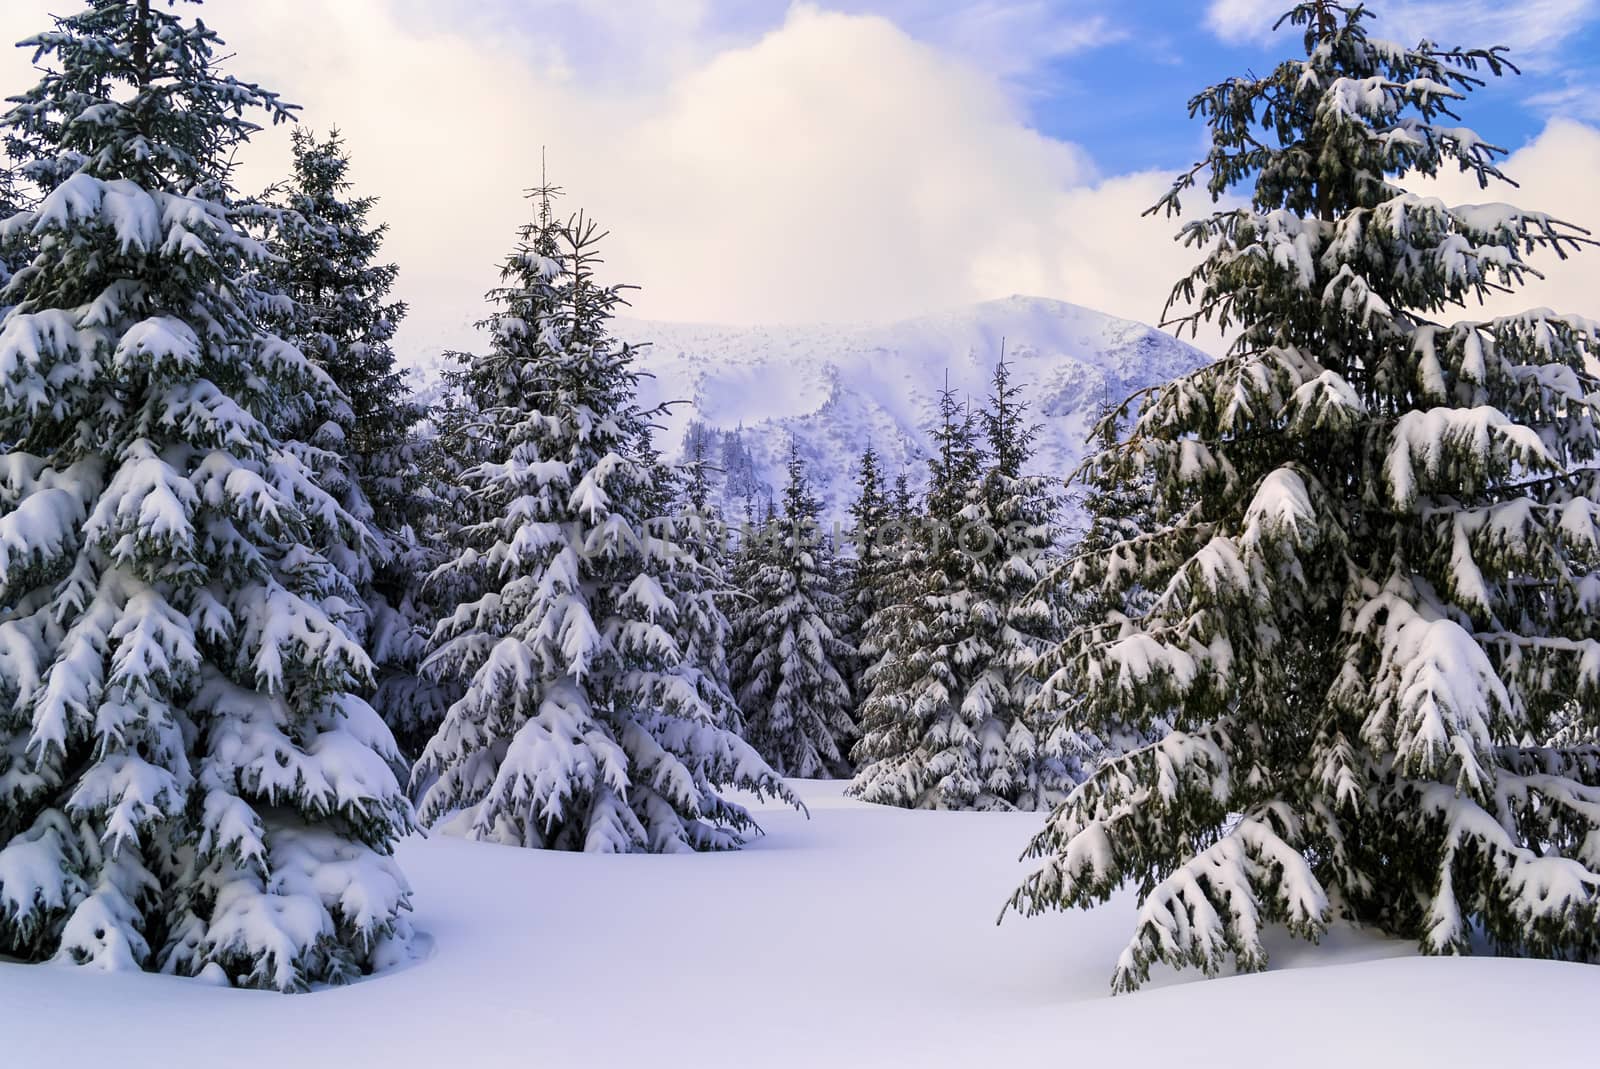 Large snow covered spruce trees. View of the snowy slope with cloud on top. Smooth snow. Winter forest. Ukraine